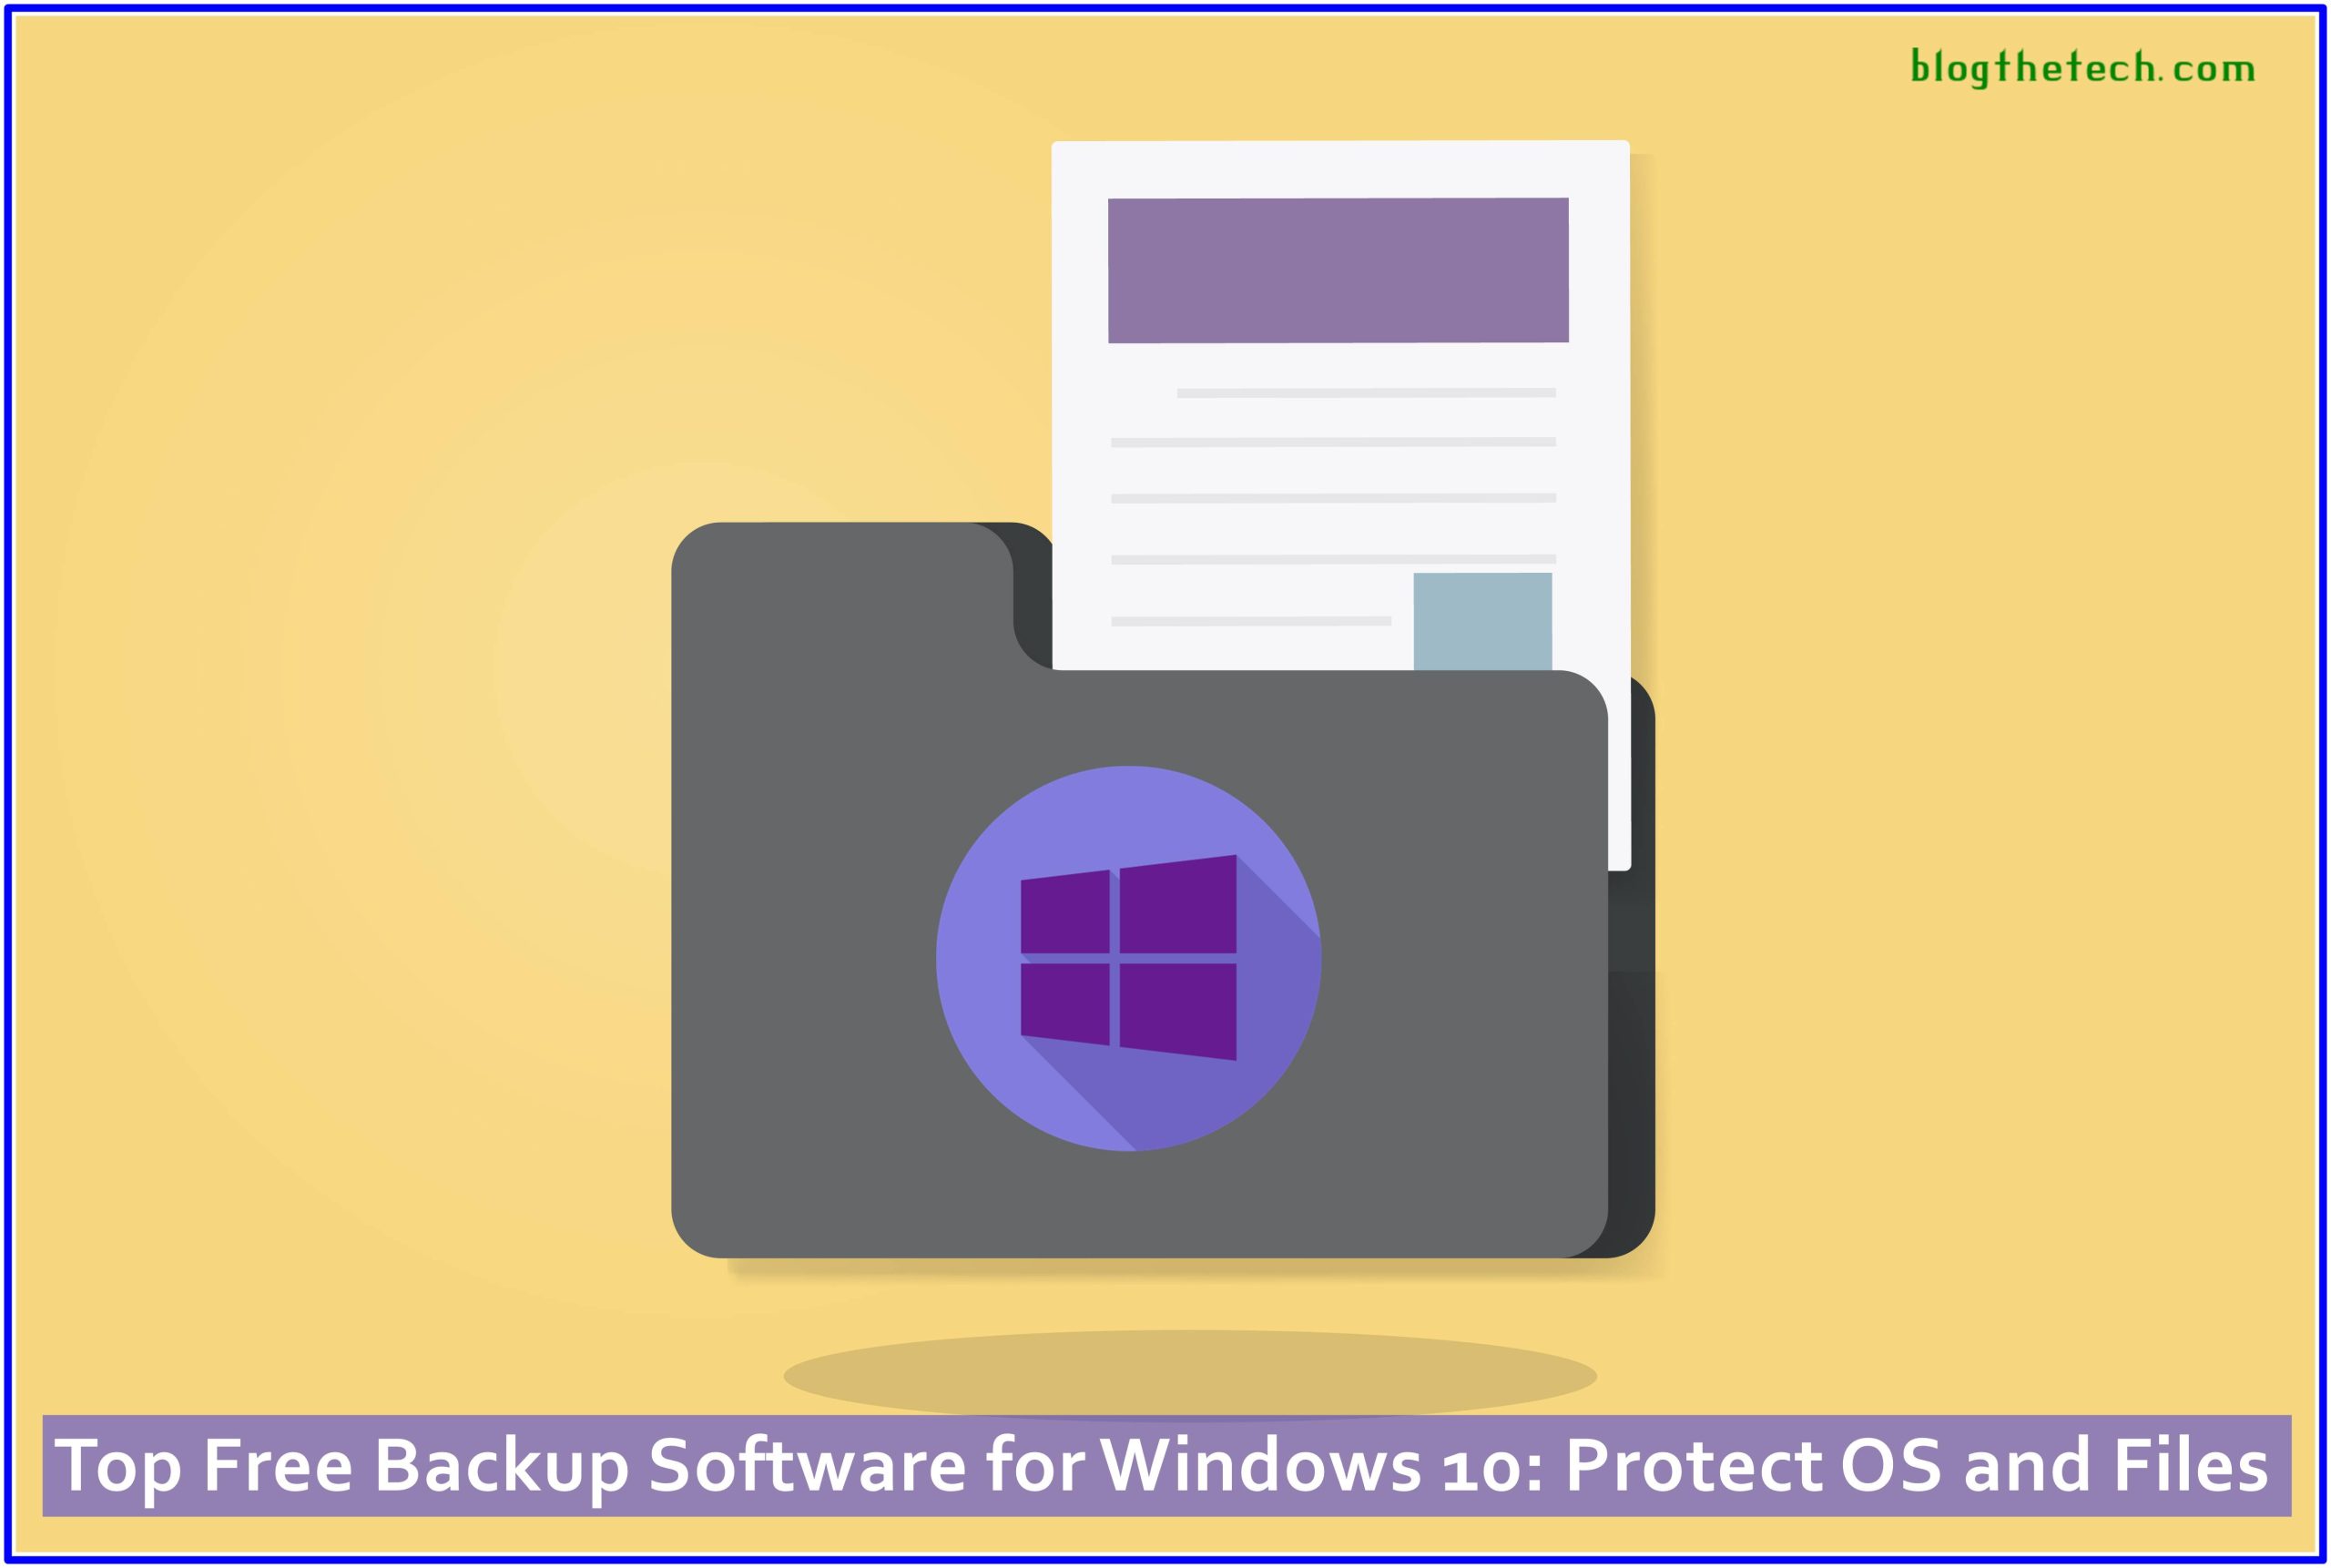 Top Free Backup Software for Windows 10 Protect OS and Files